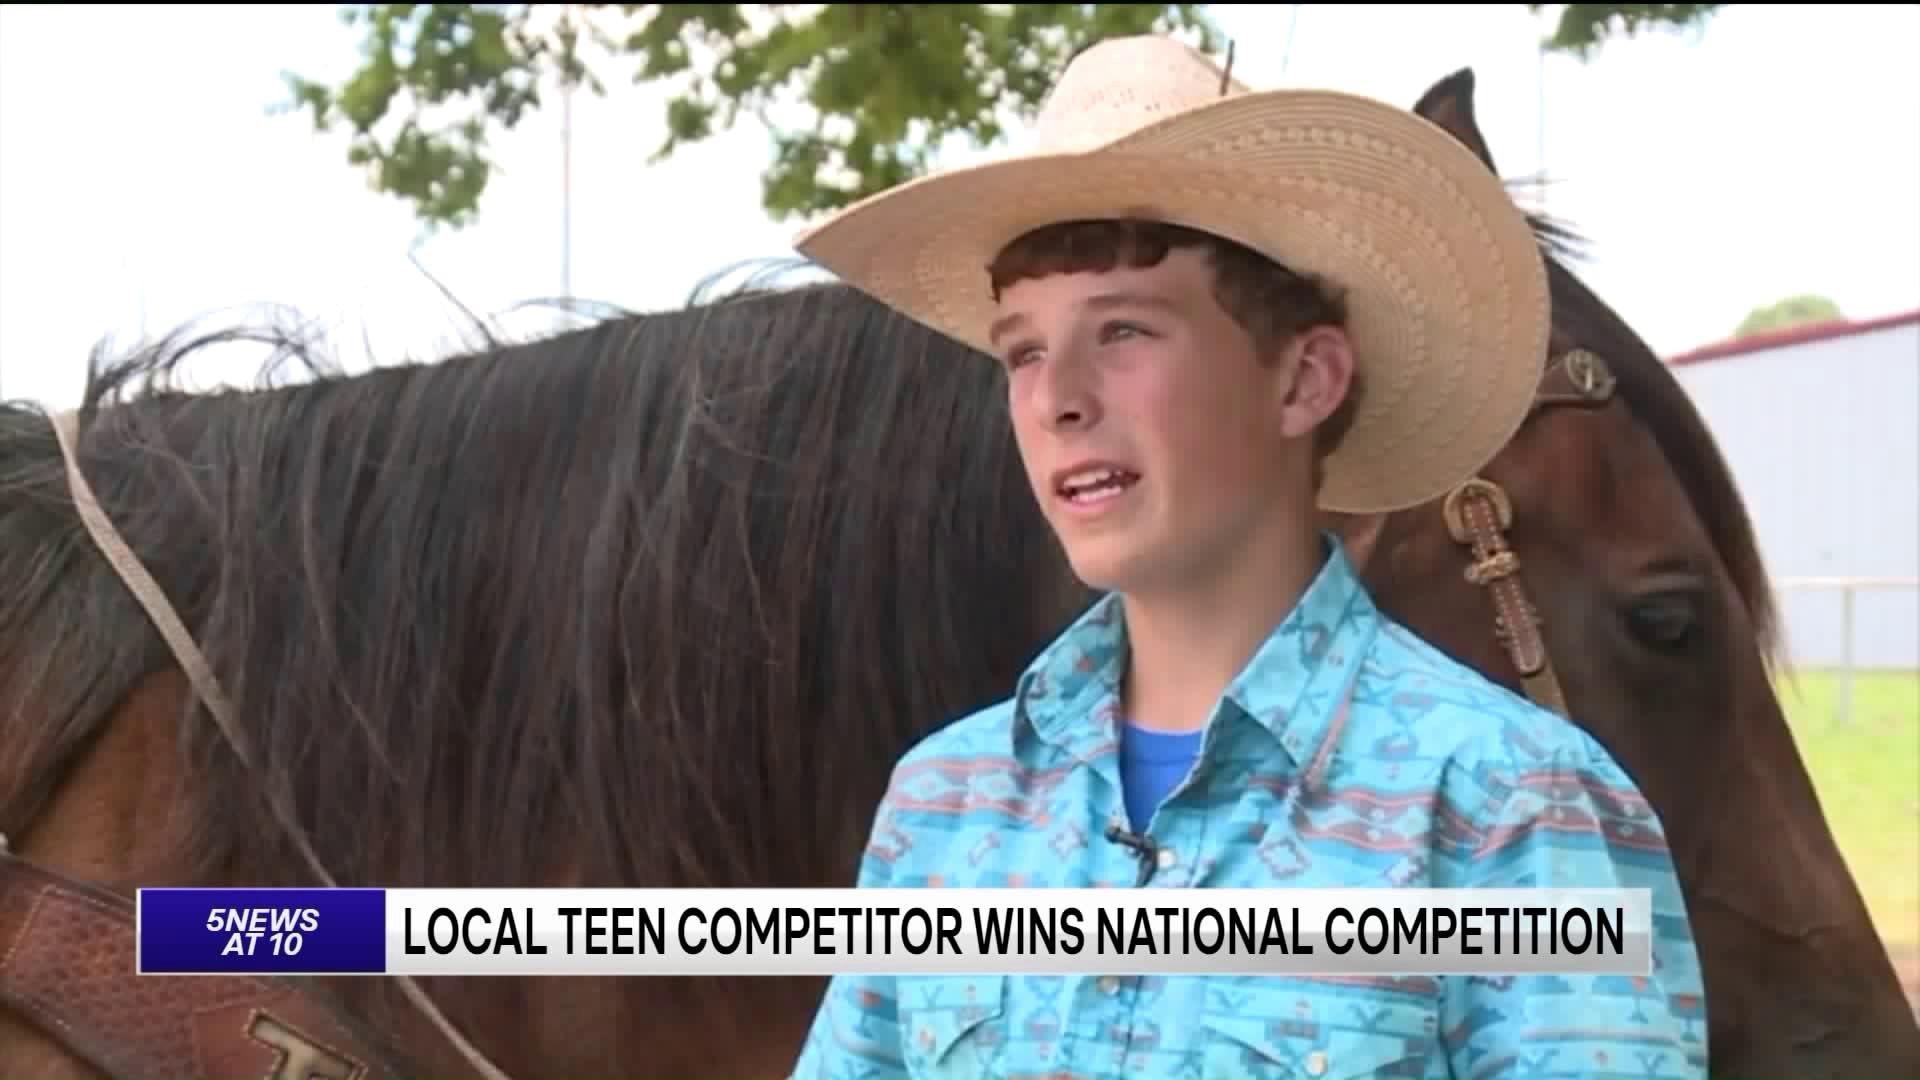 Local Teen Competitor Wins National Competition